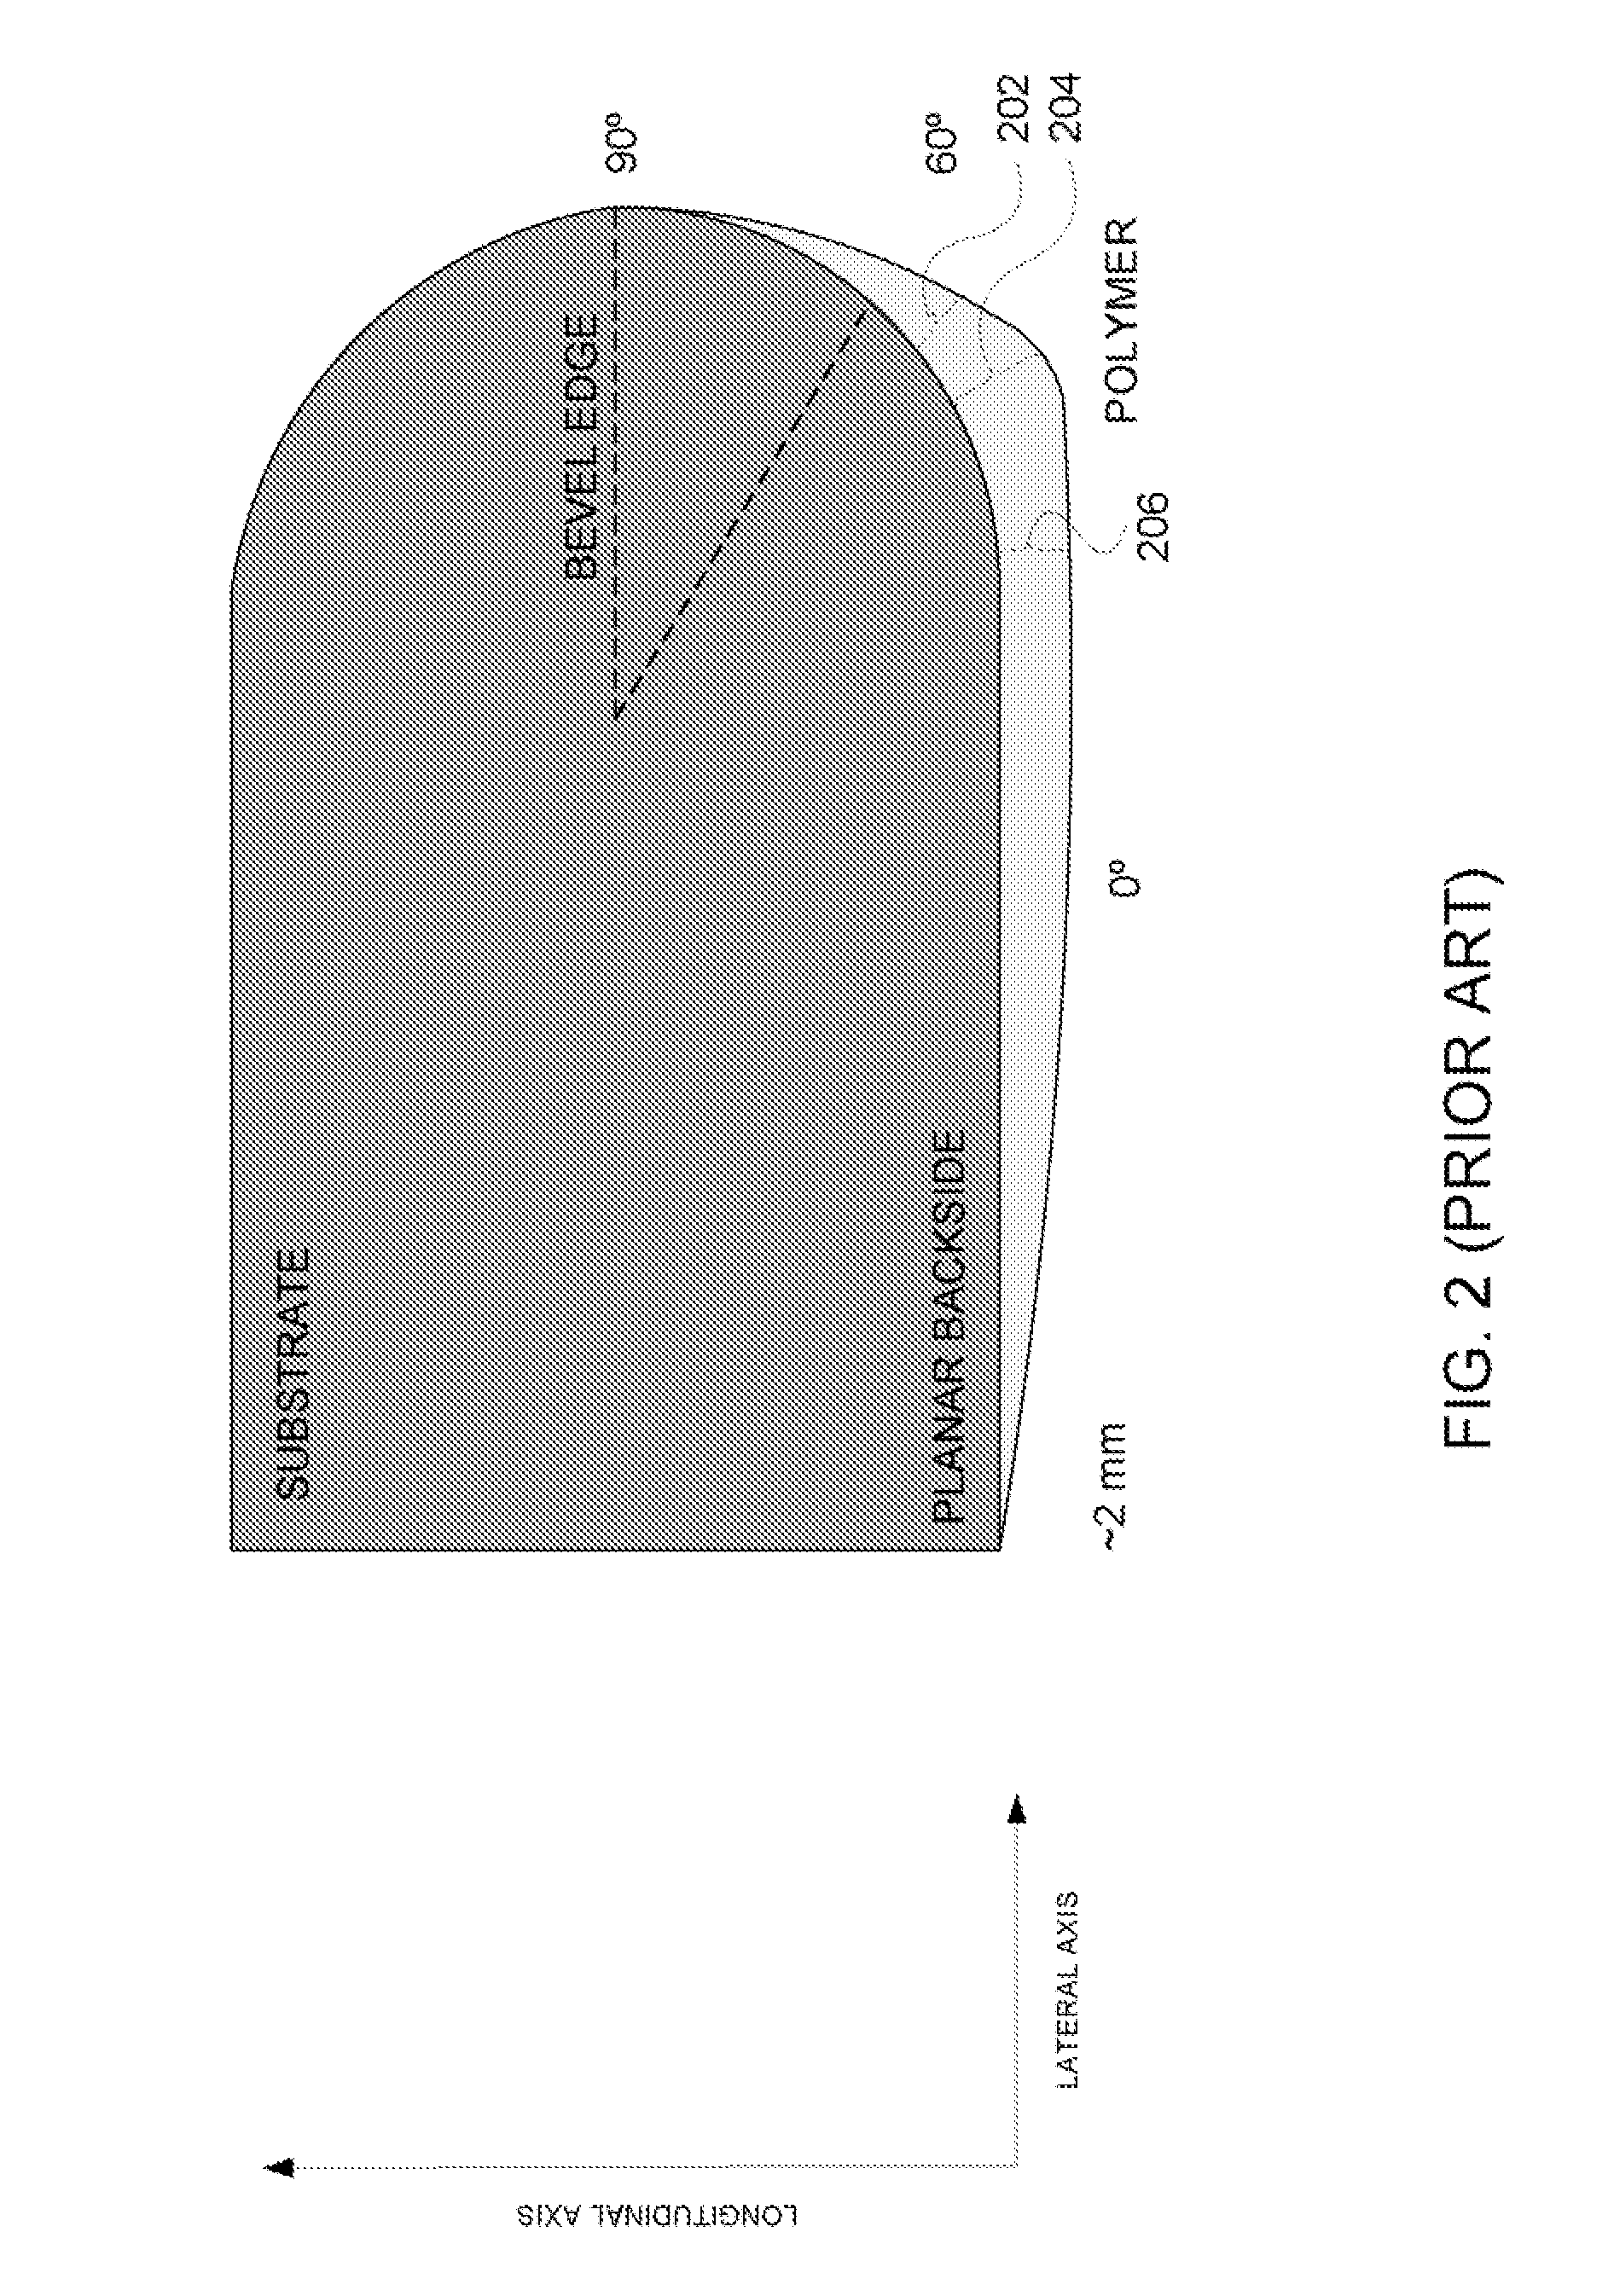 Edge ring arrangements for substrate processing